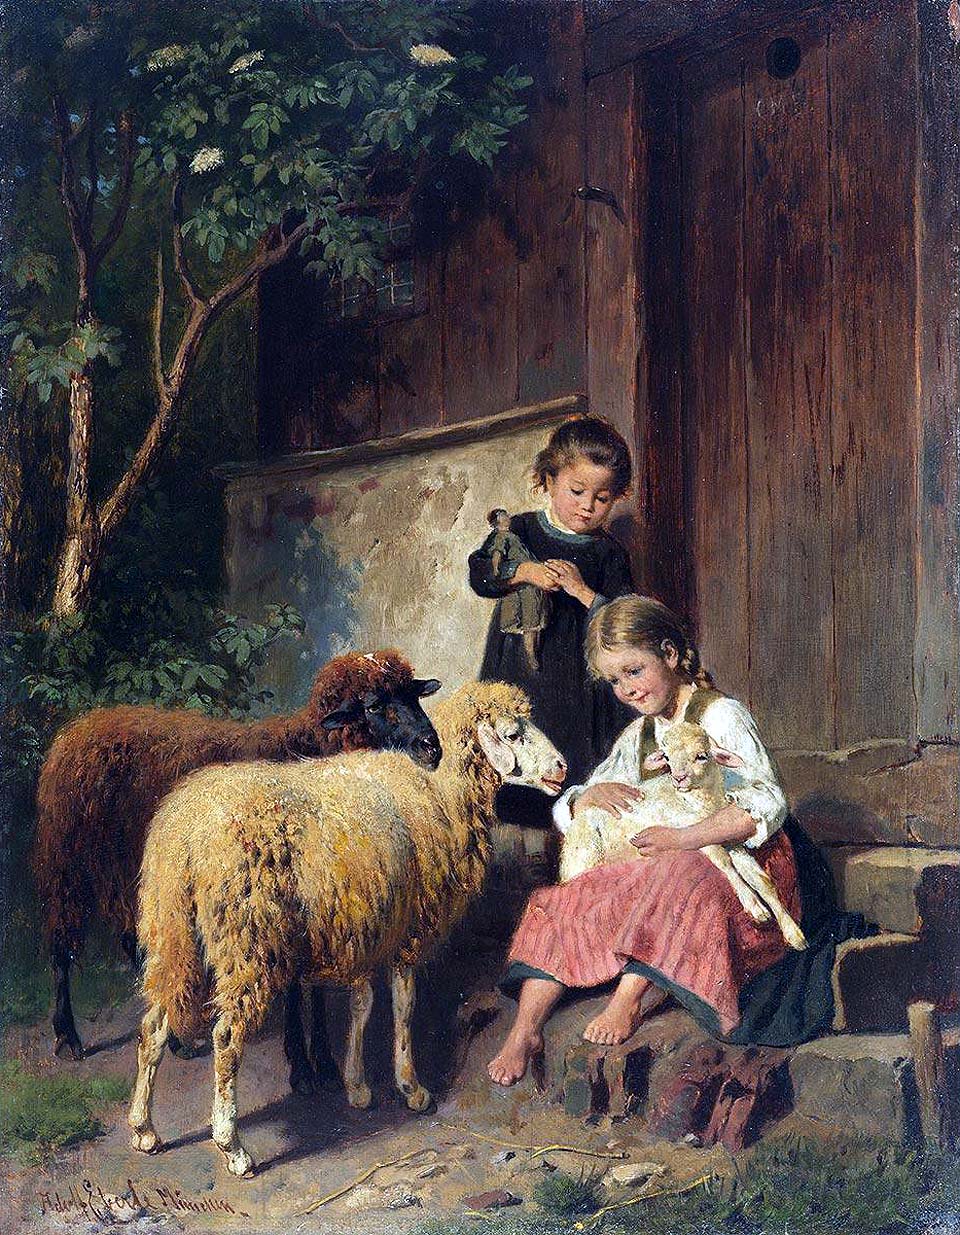 Two children with sheep